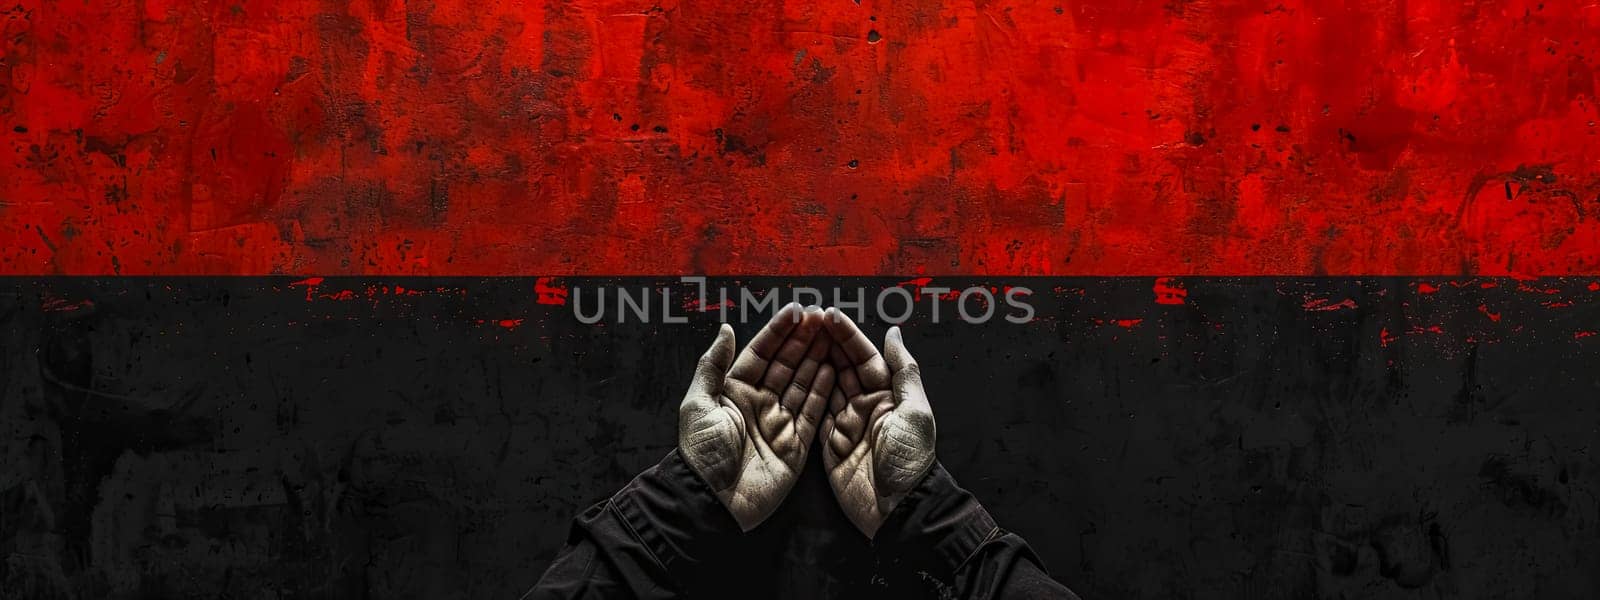 Abstract Red and Black Grunge Background with Hands in Prayer by Edophoto